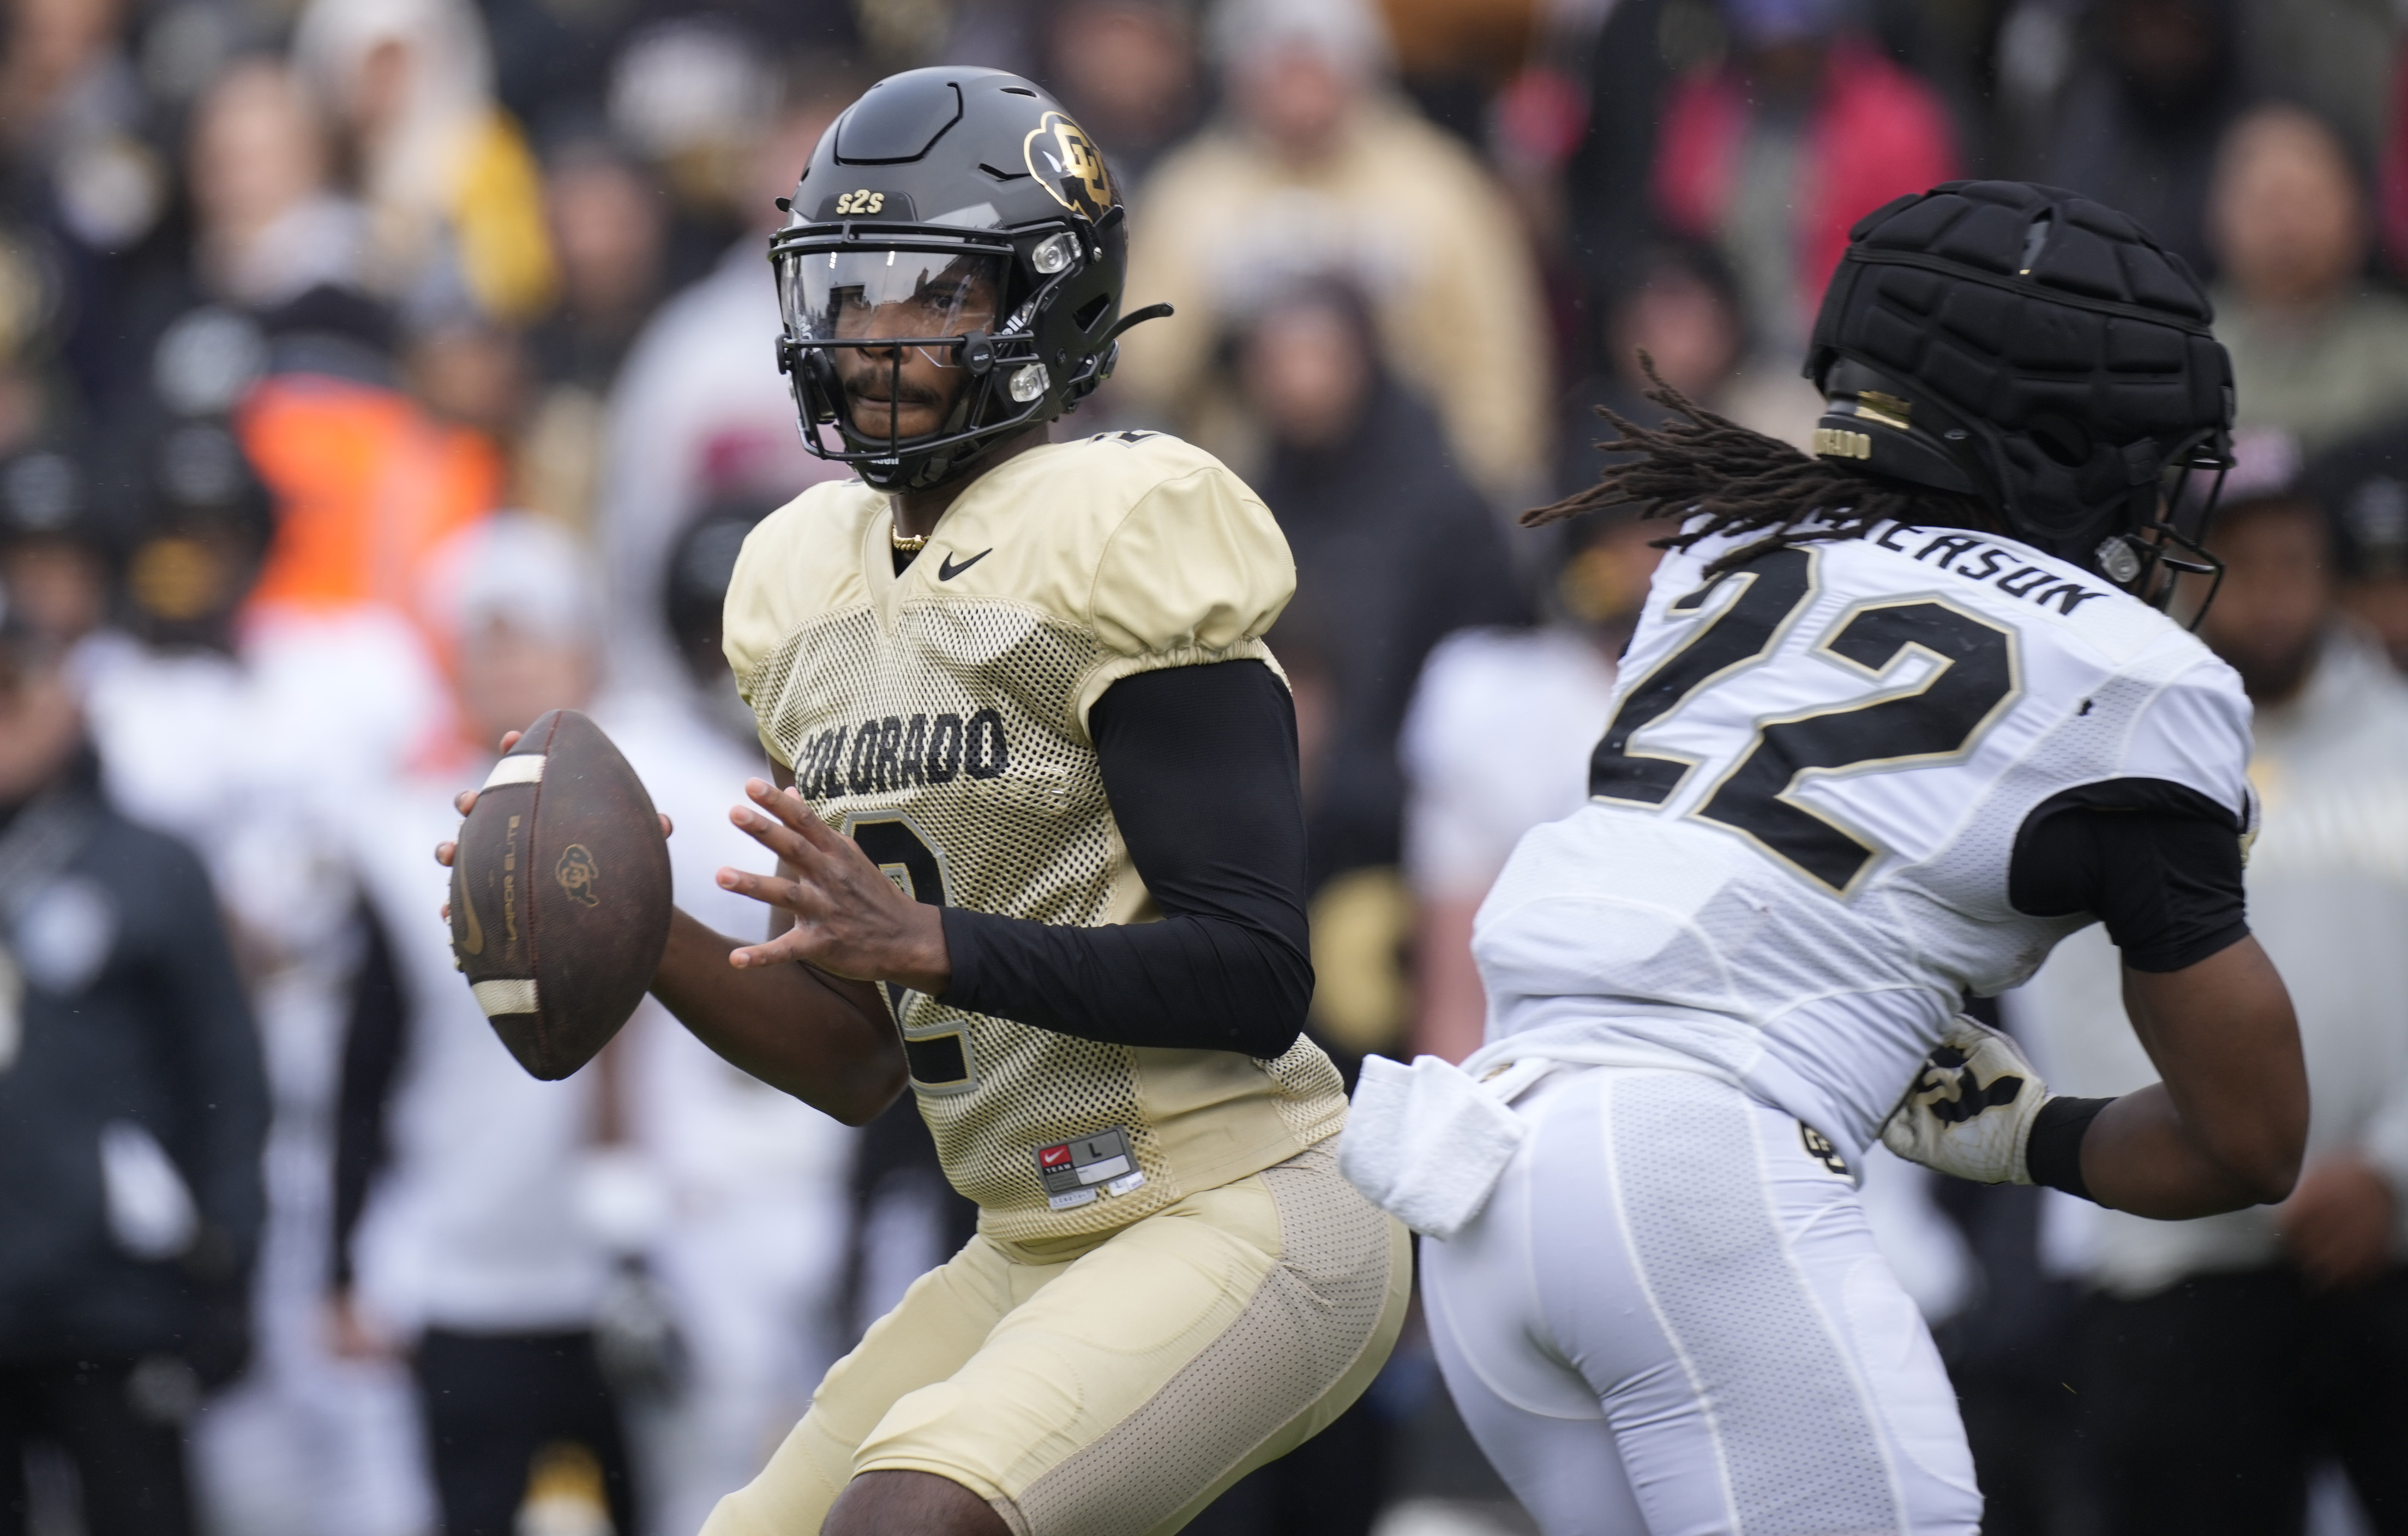 Buffs give 'Prime' one cheerful debut